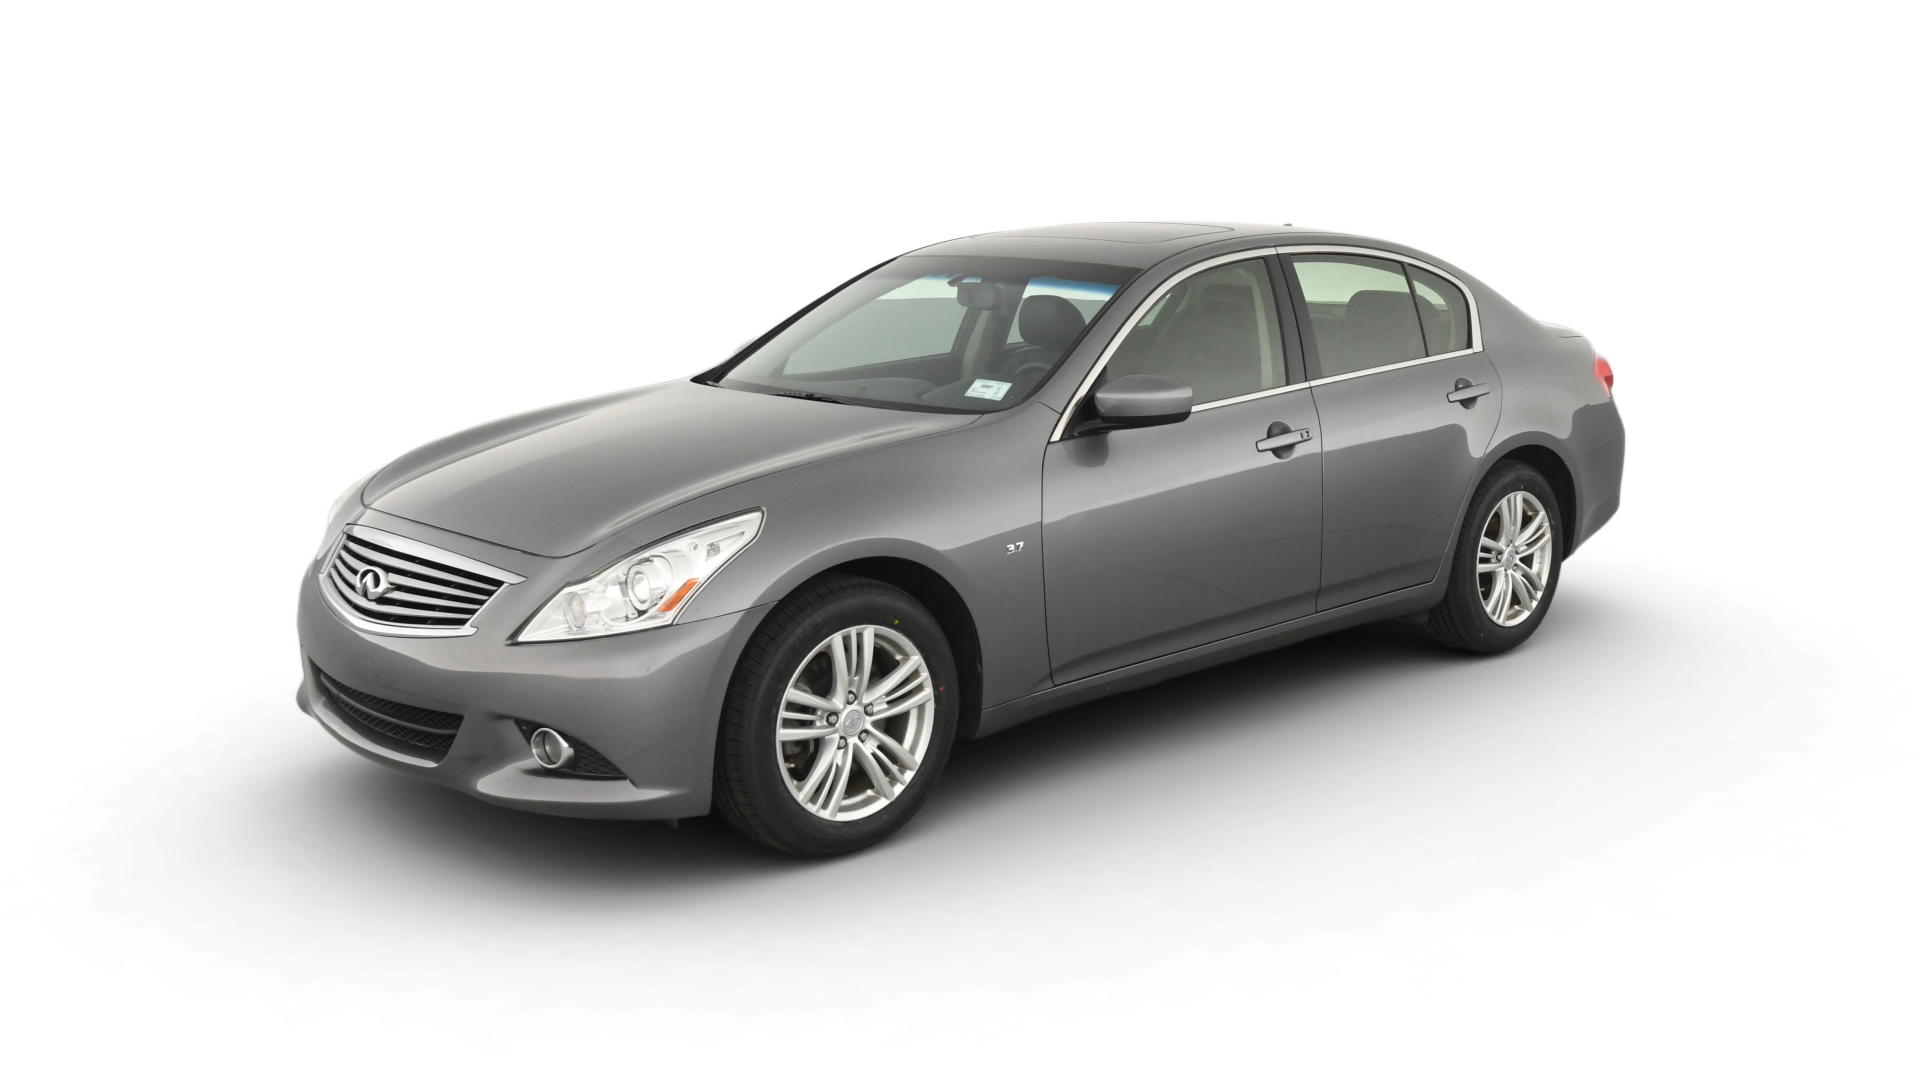 Used INFINITI Q40 For Sale Online | Carvana